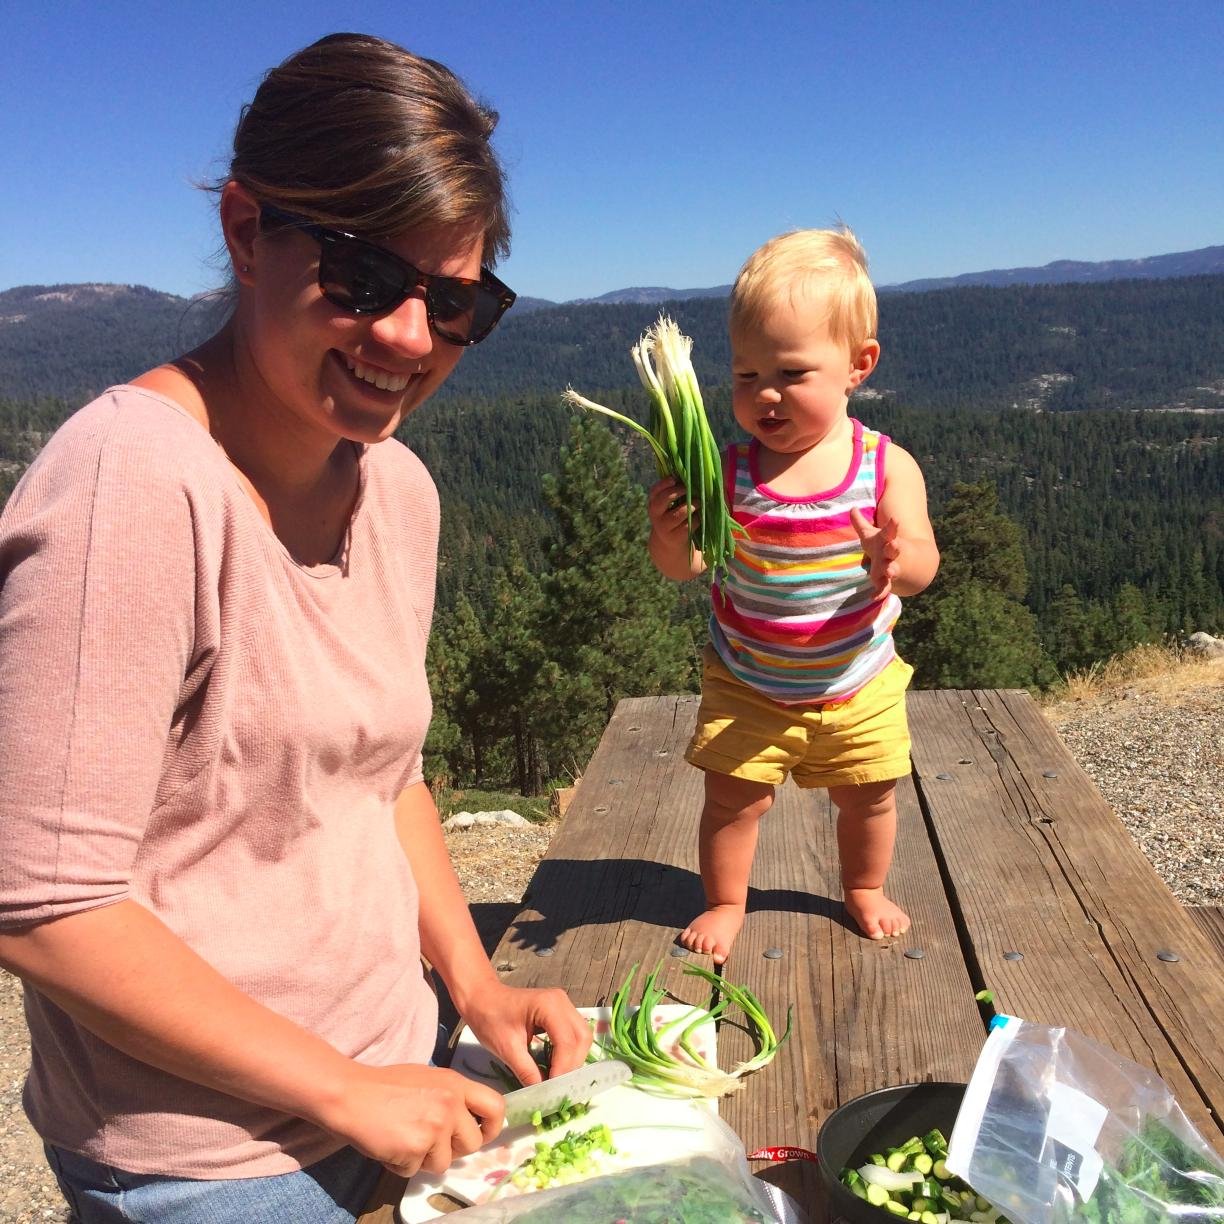 Paleo-AIP-Keto wife and mama, Food scientist, cook, and functional medicine practitioner @NourishBThrive